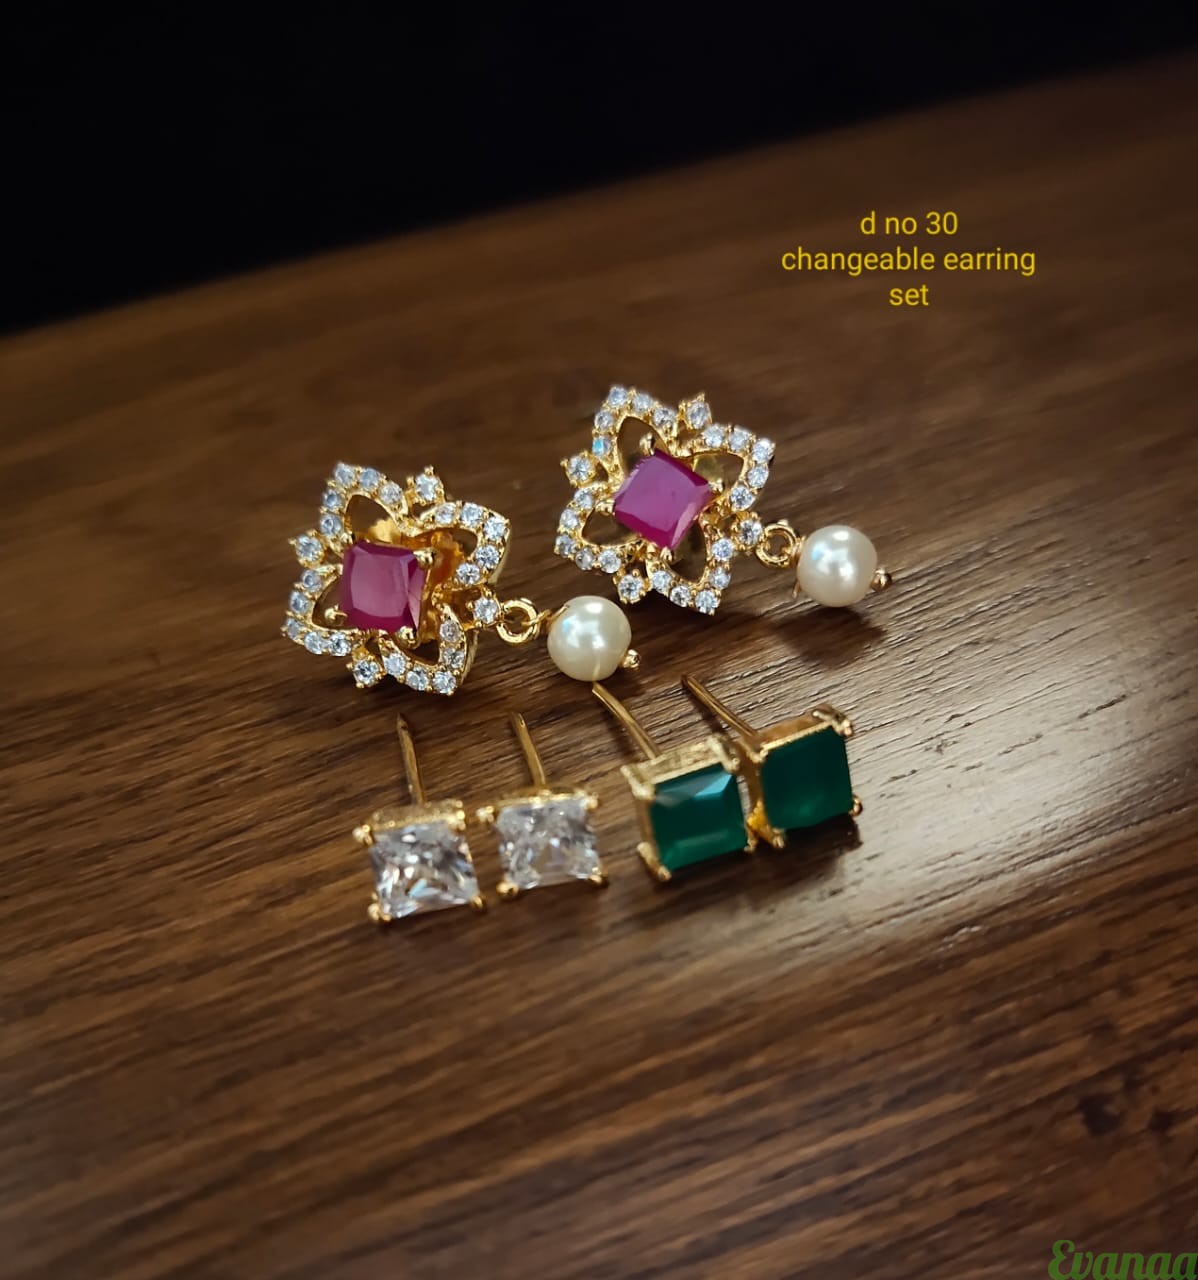 Discover 228+ multi color changeable earrings latest